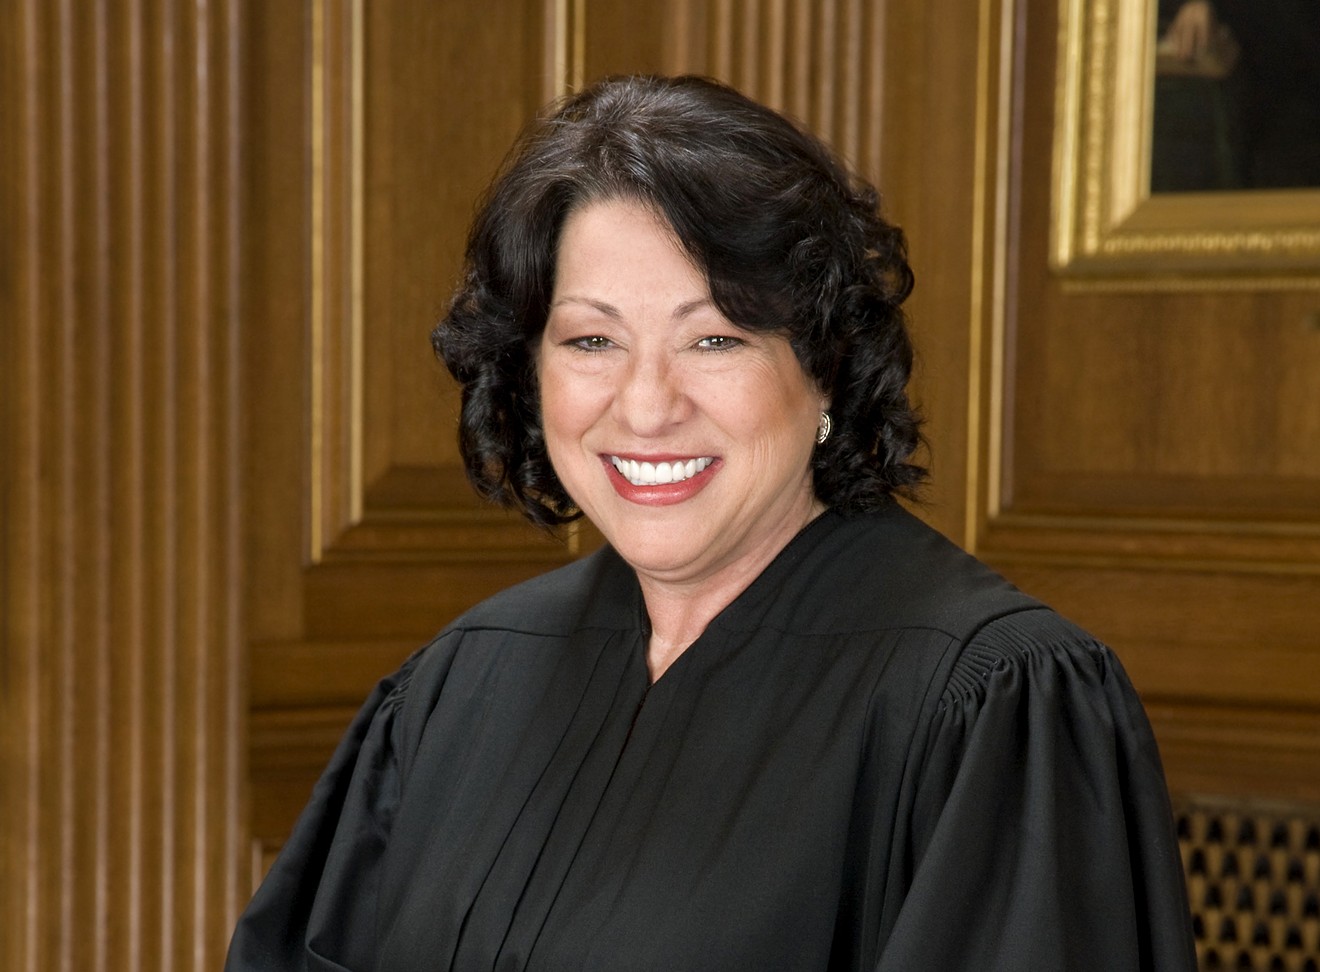 U.S. Supreme Court Justice Sonia Sotomayor and Gloria Estefan will speak at Temple Judea in Coral Gables.